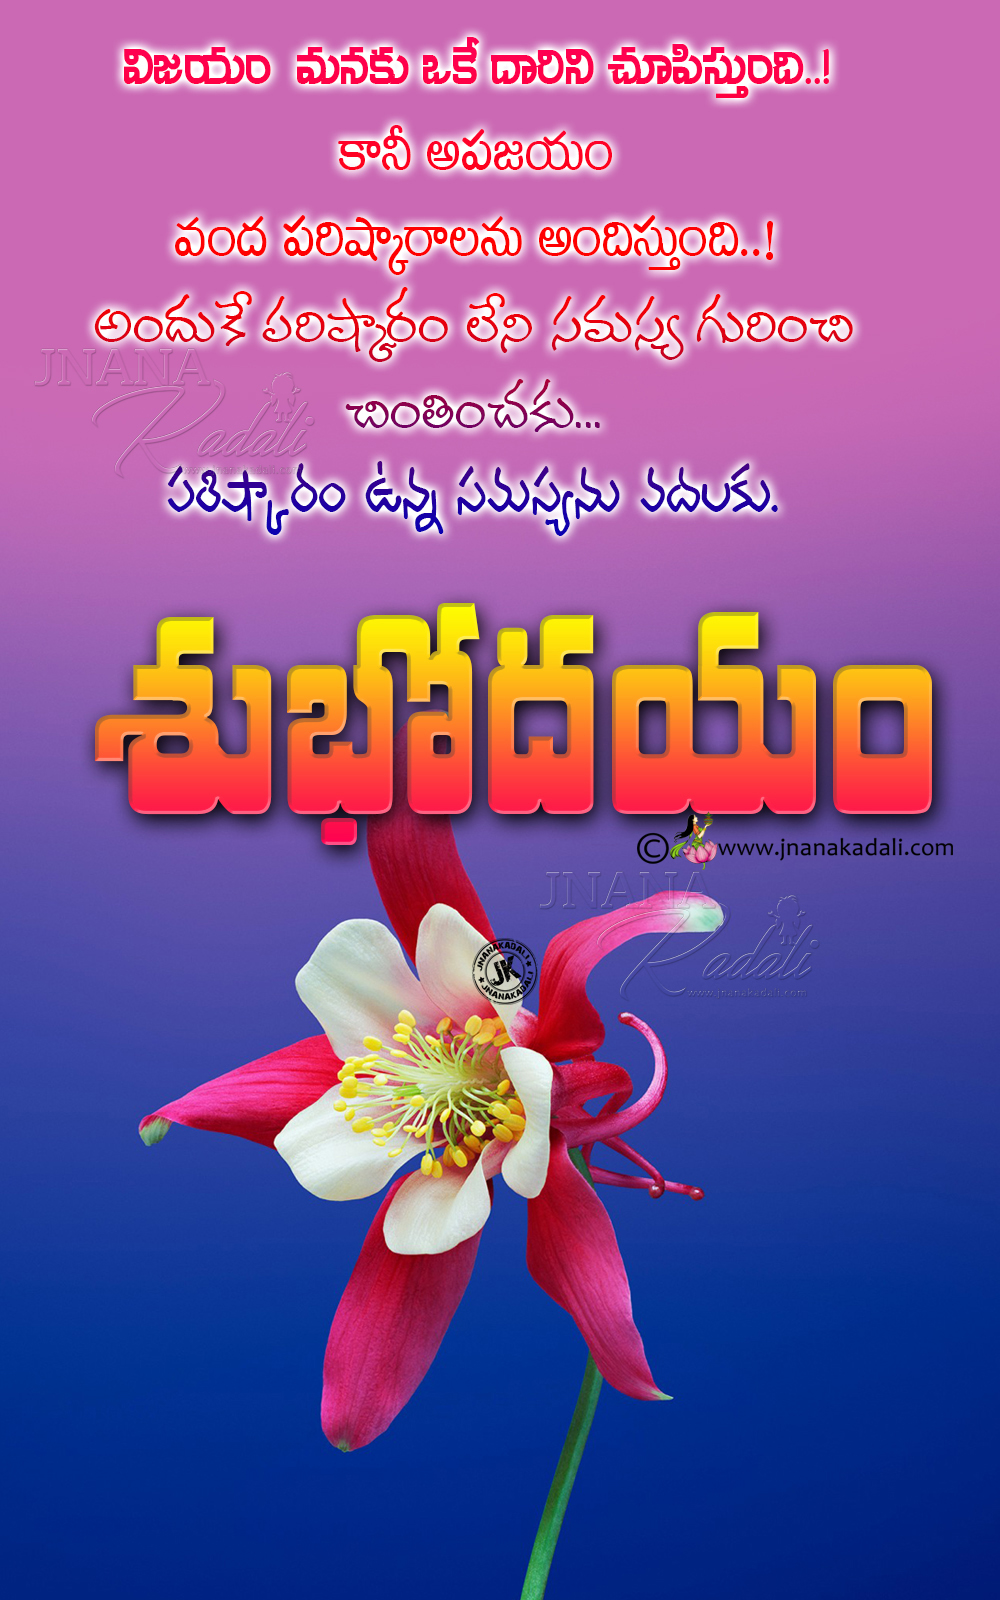 Telugu Good Morning Inspirational messages hd wallpapers Free ...